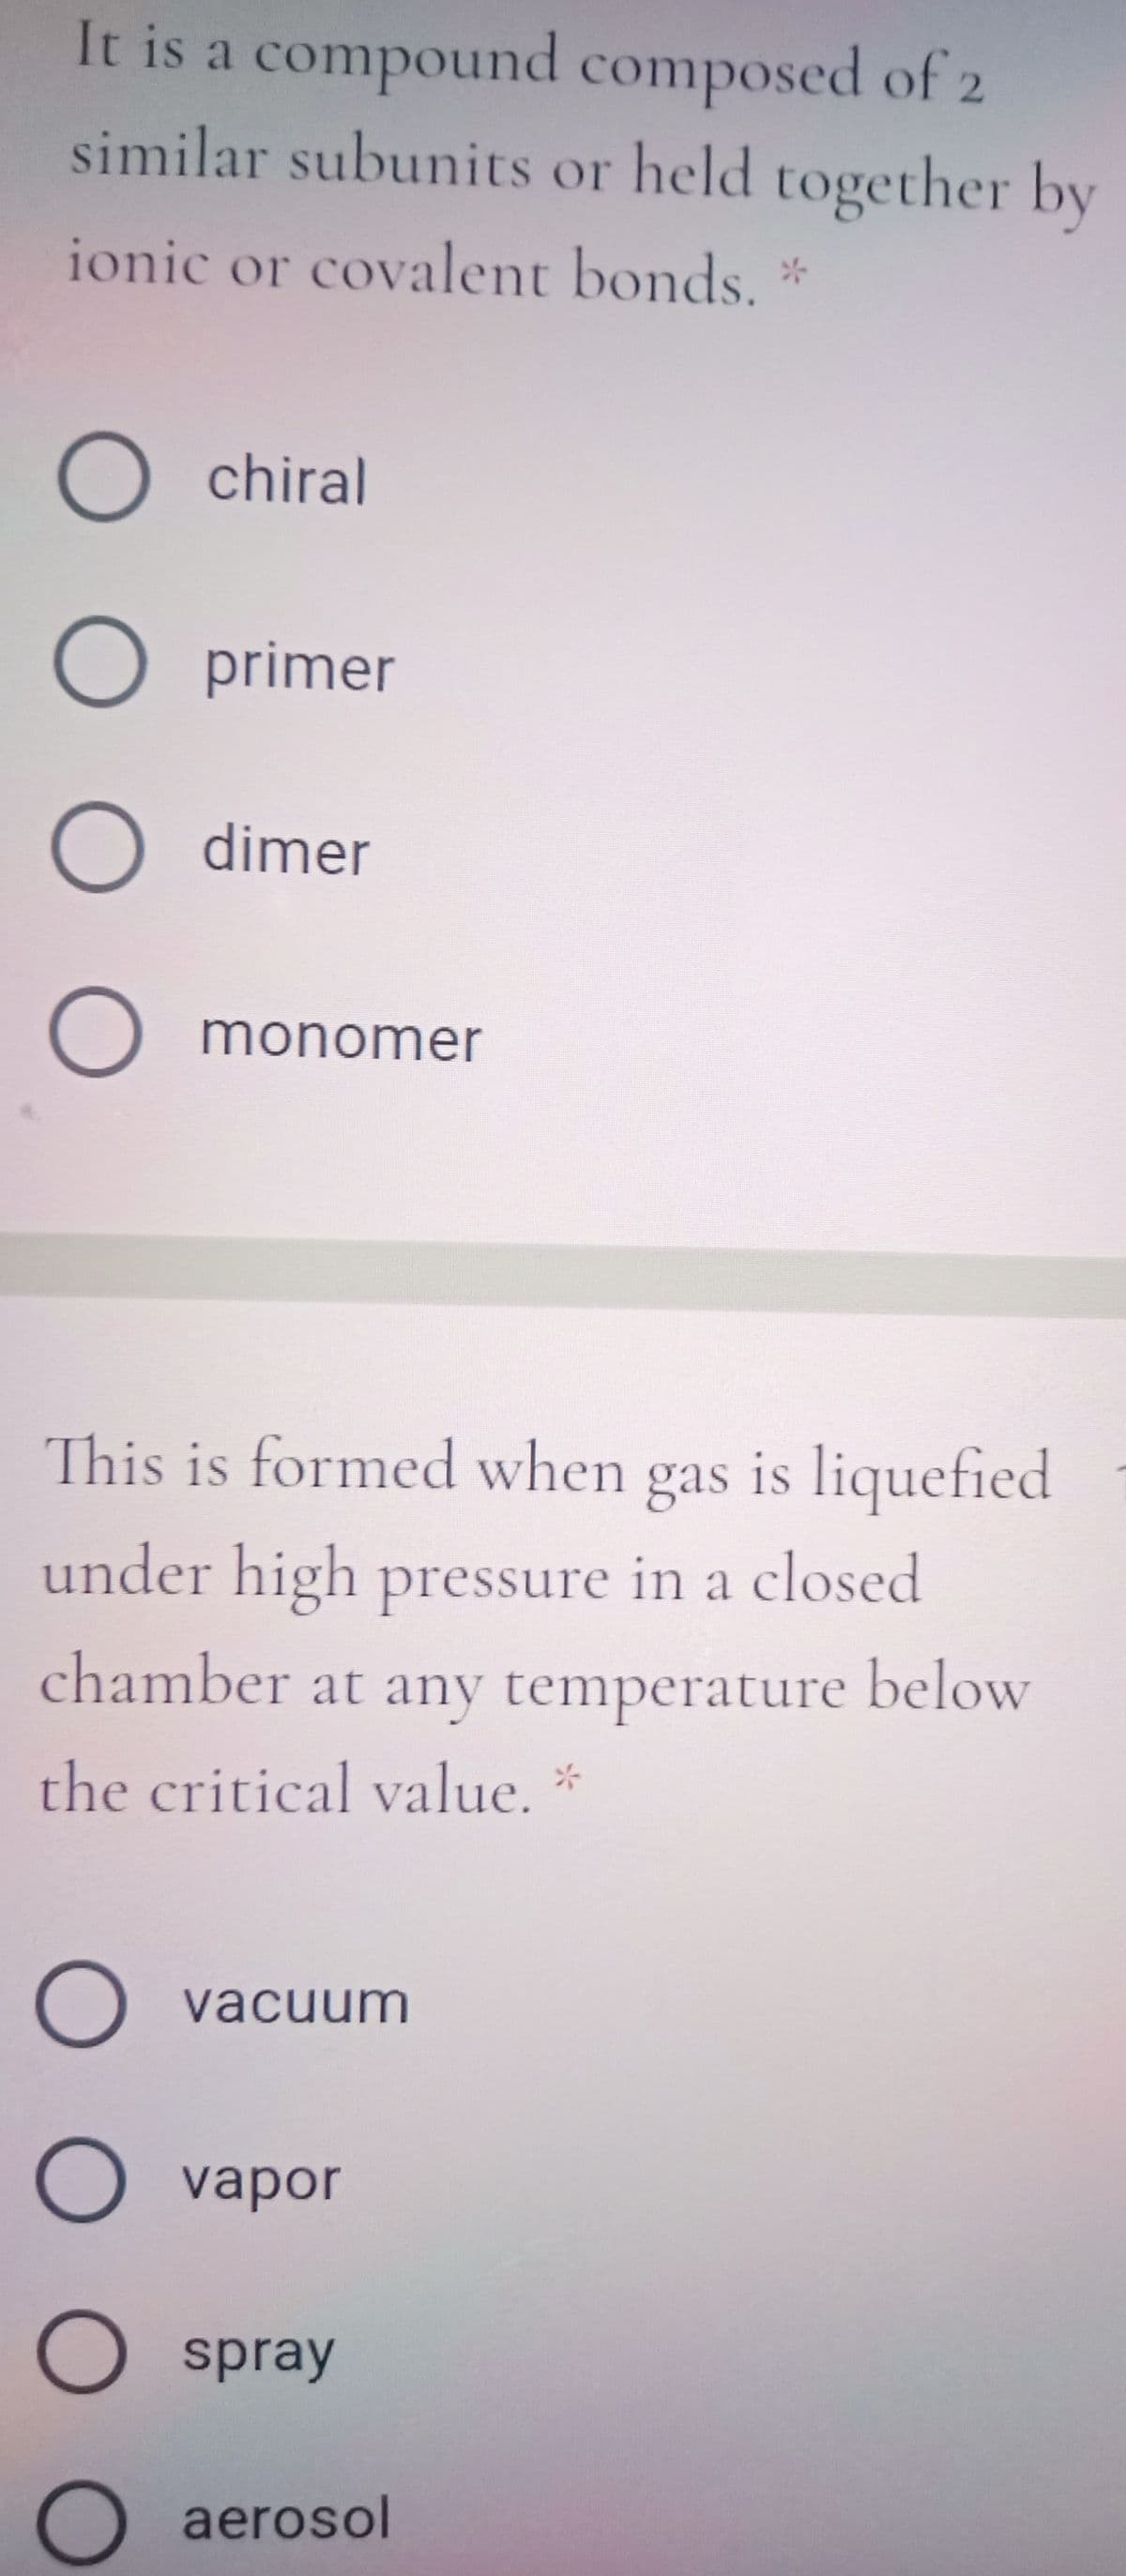 It is a compound composed of 2
similar subunits or held together by
ionic or covalent bonds.
O chiral
O primer
dimer
monomer
This is formed when gas is liquefied
under high pressure in a closed
chamber at any temperature below
the critical value. *
vacuum
vapor
spray
aerosol
